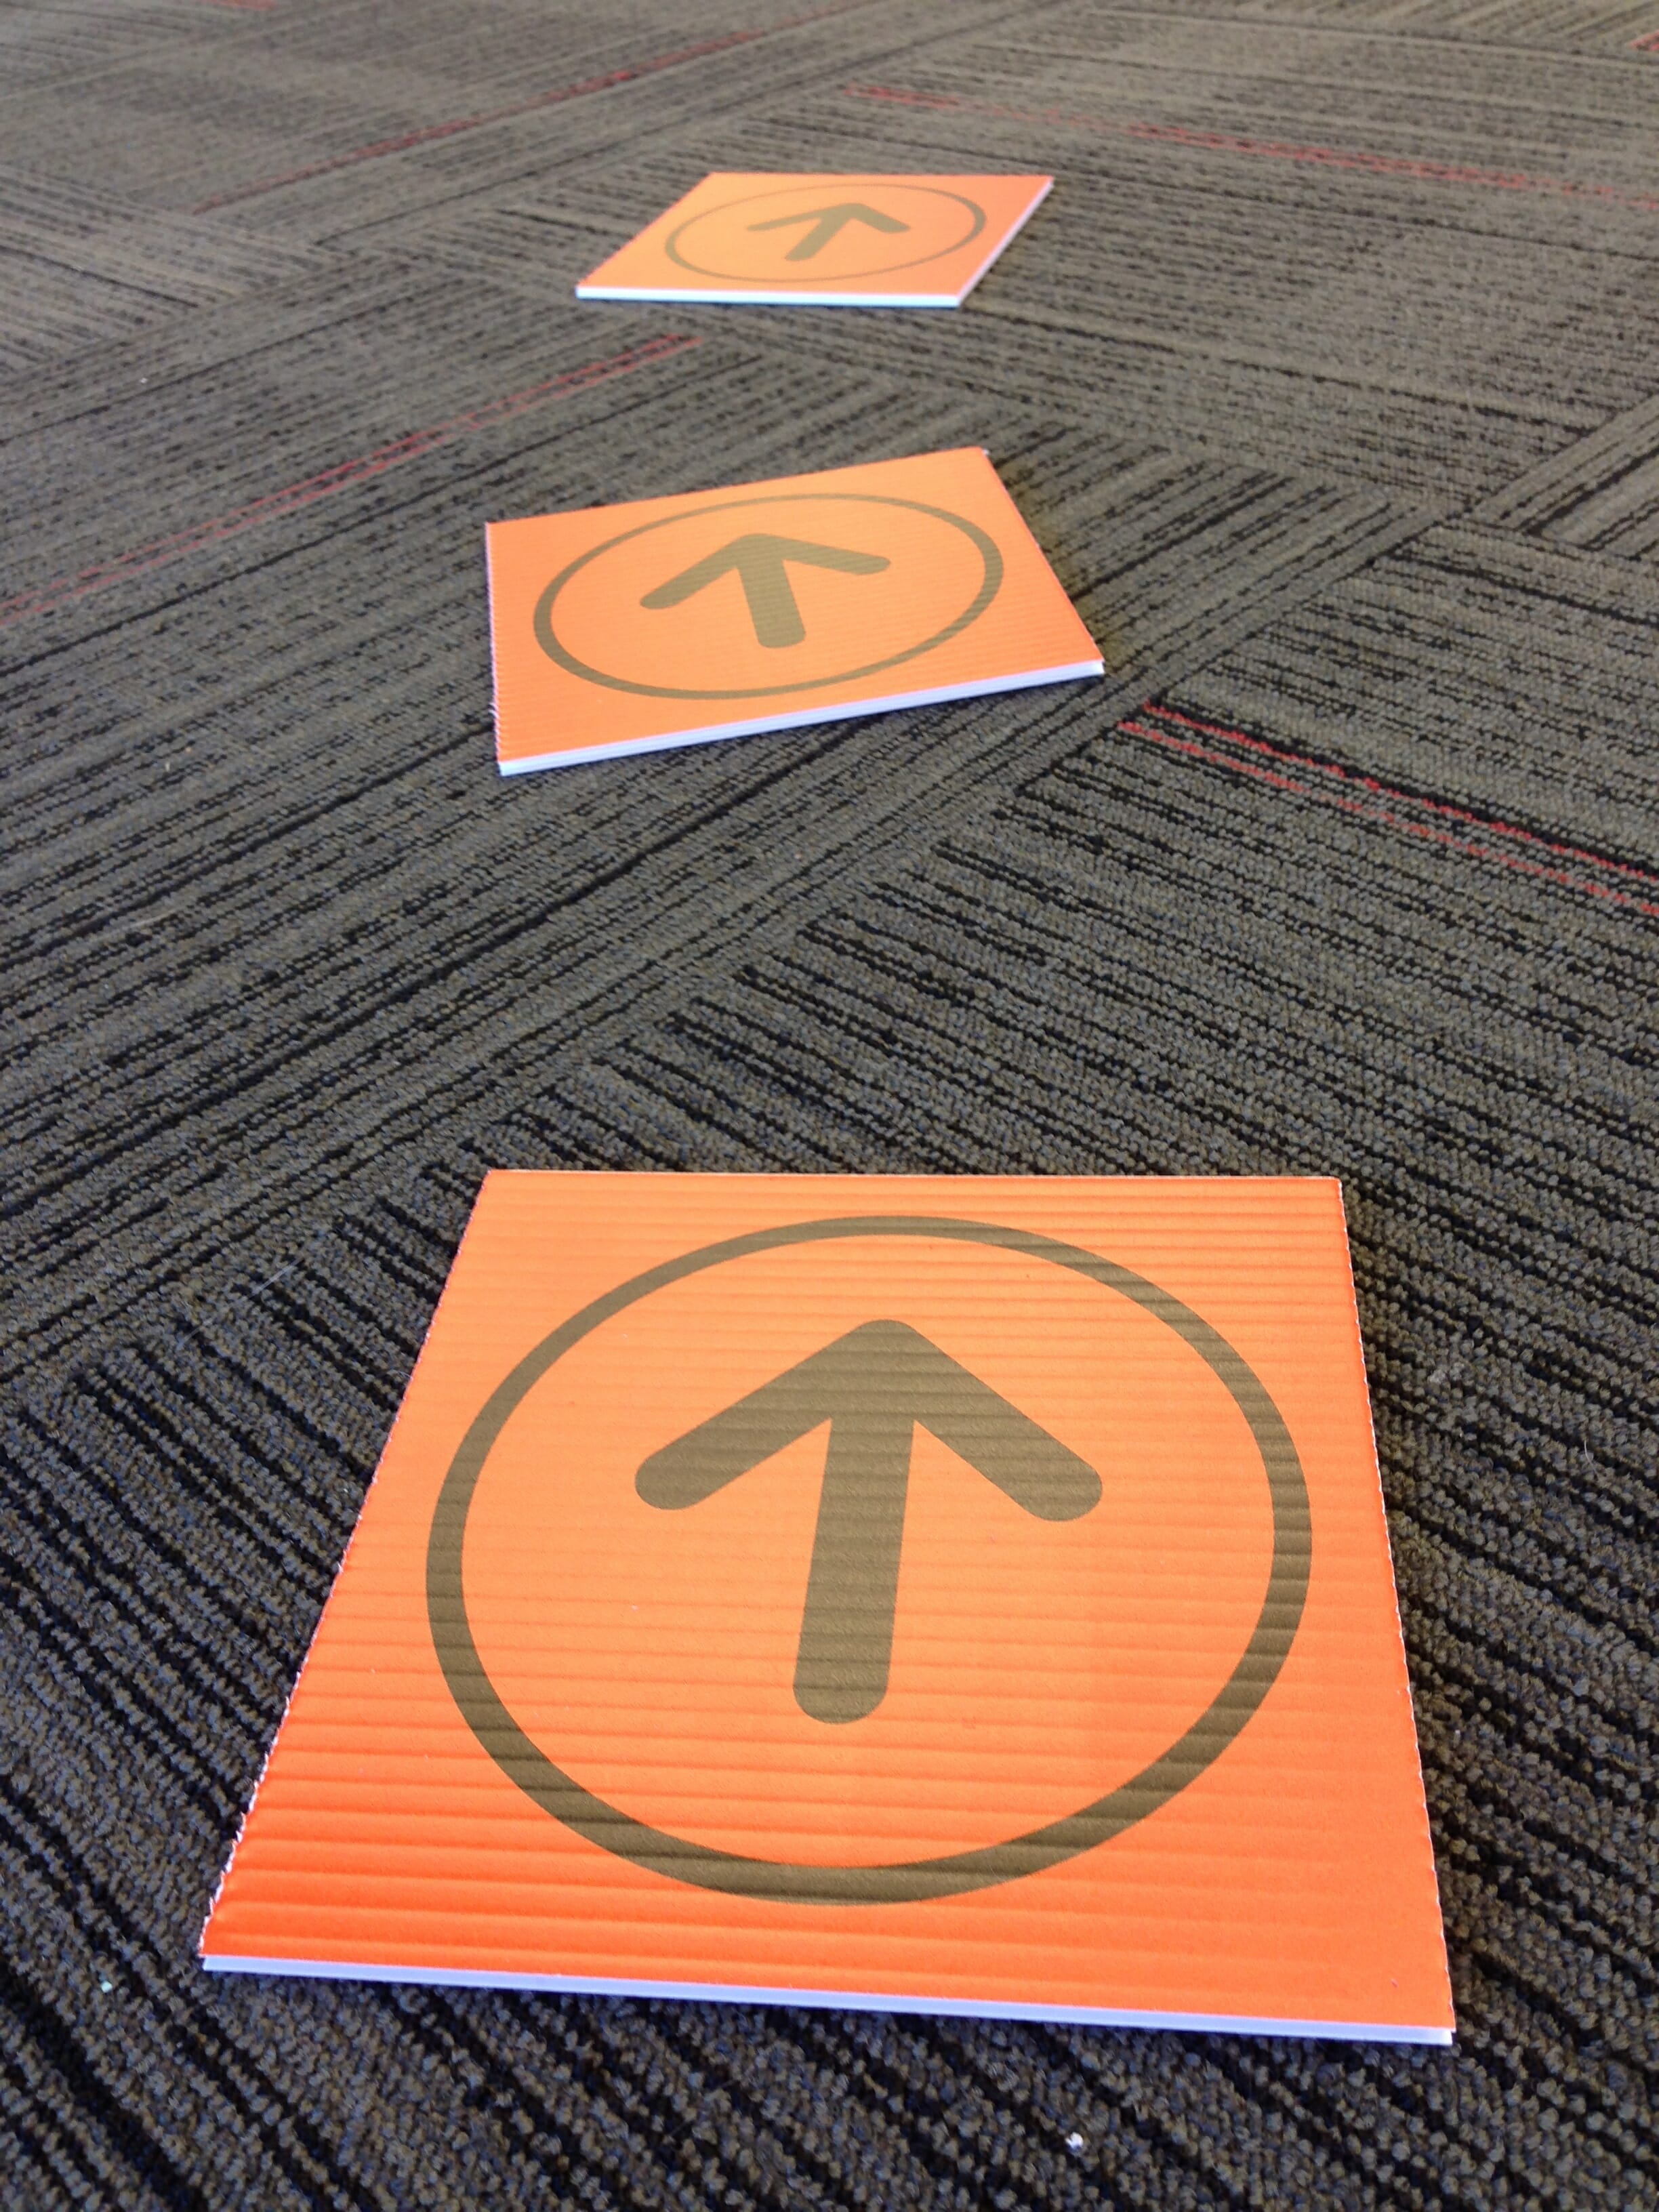 directional arrows